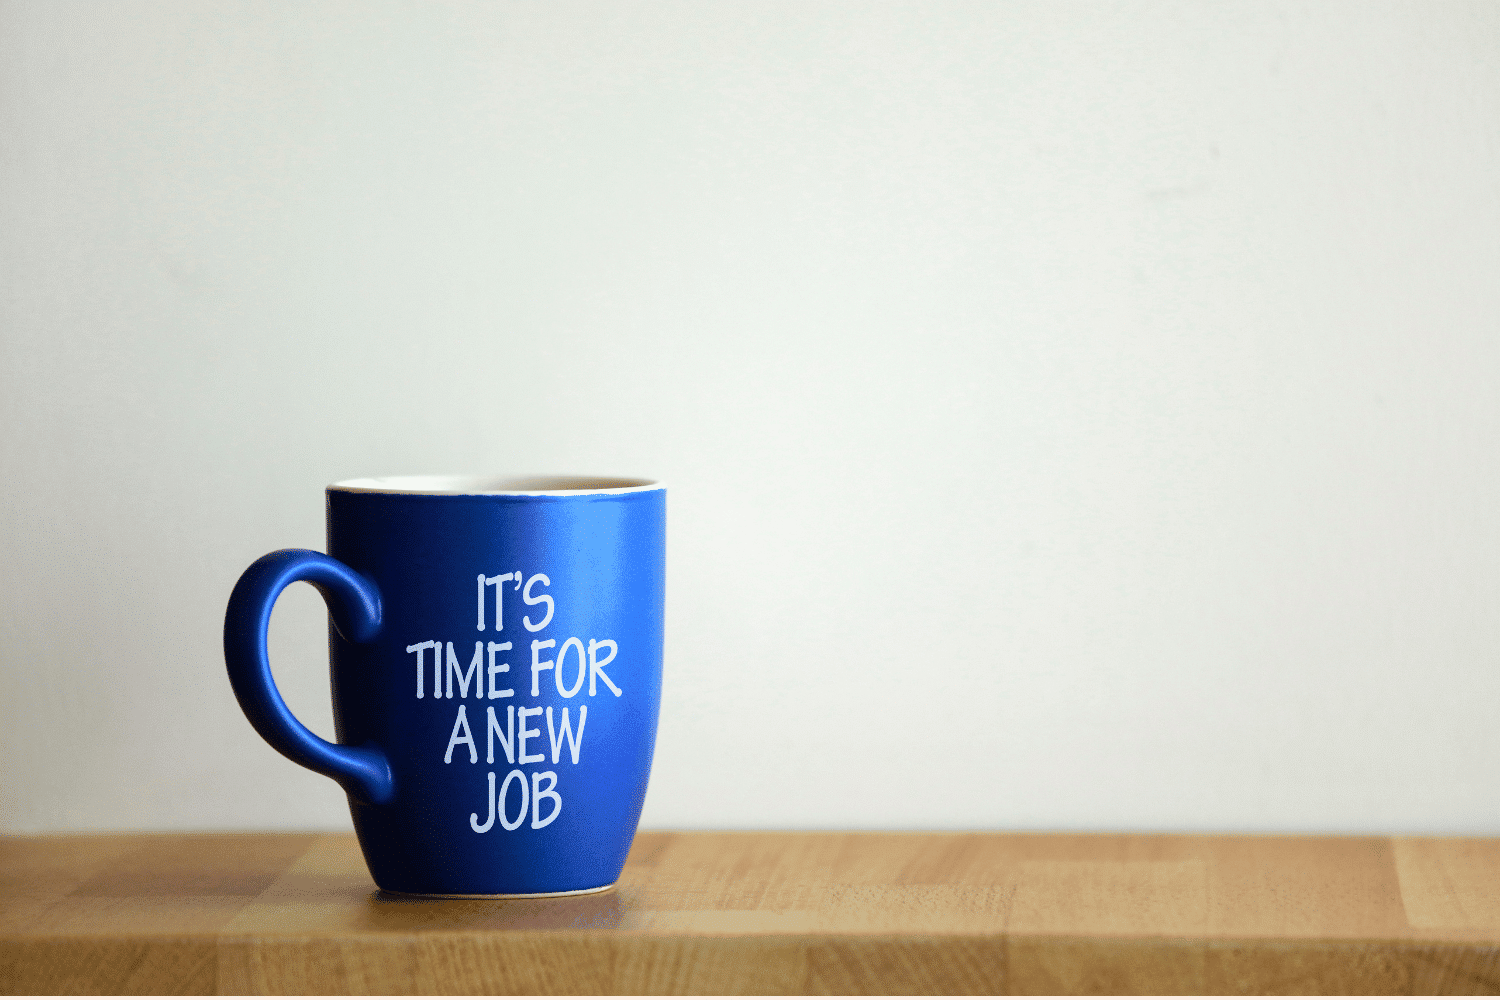 Blue coffee cup on table that says "It's time for a new job"